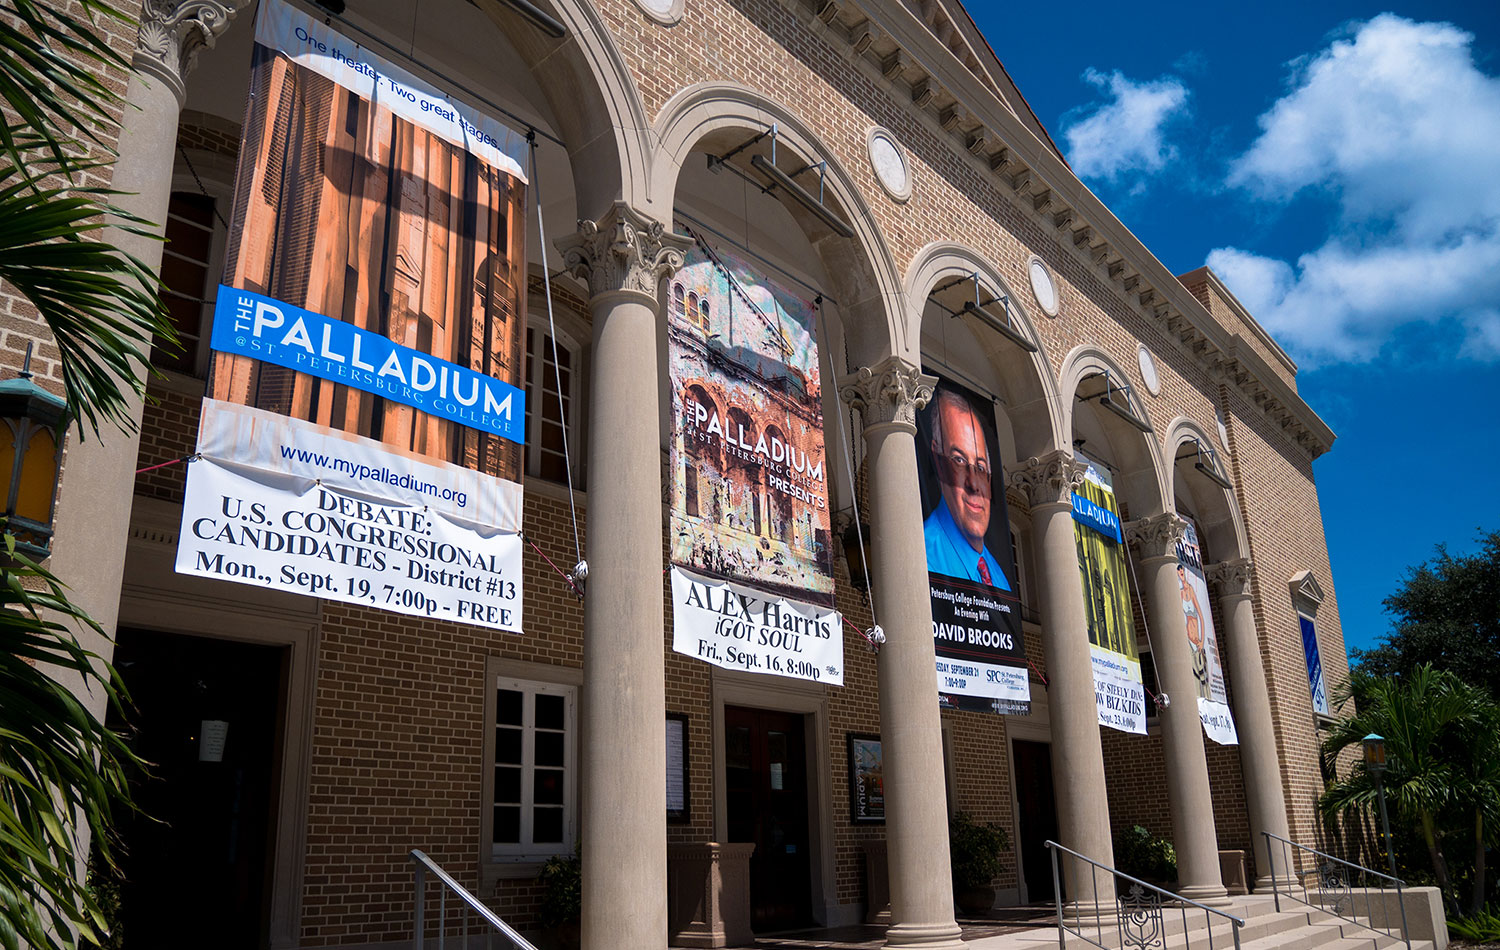 $10 Million Renovation Campaign Announced for The Palladium Theater image